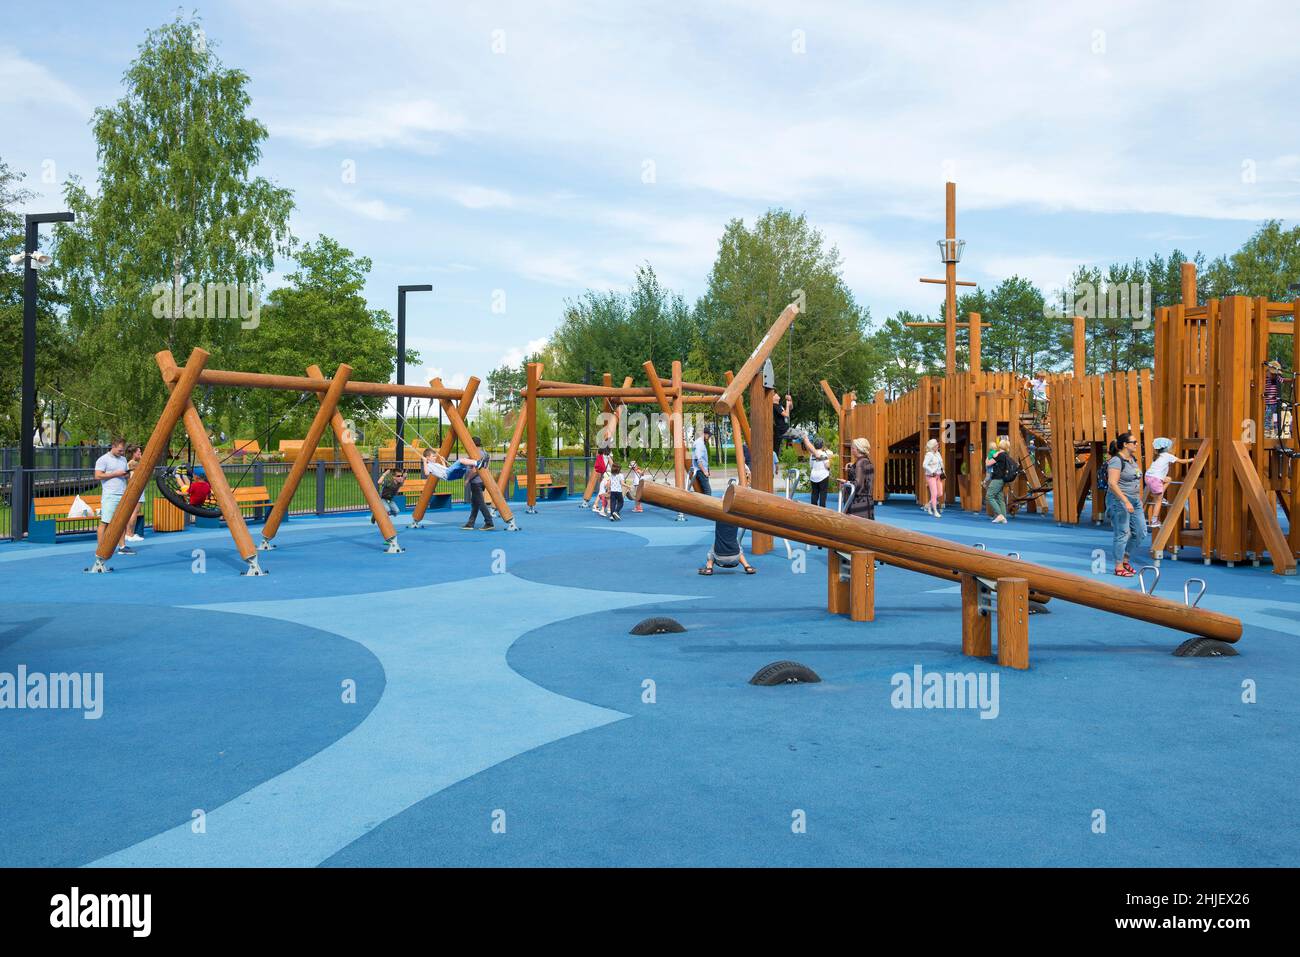 KRONSHTADT, RUSSIA - AUGUST 11, 2021: Children's playground in the city park of 'Island of Forts' on august afternoon Stock Photo